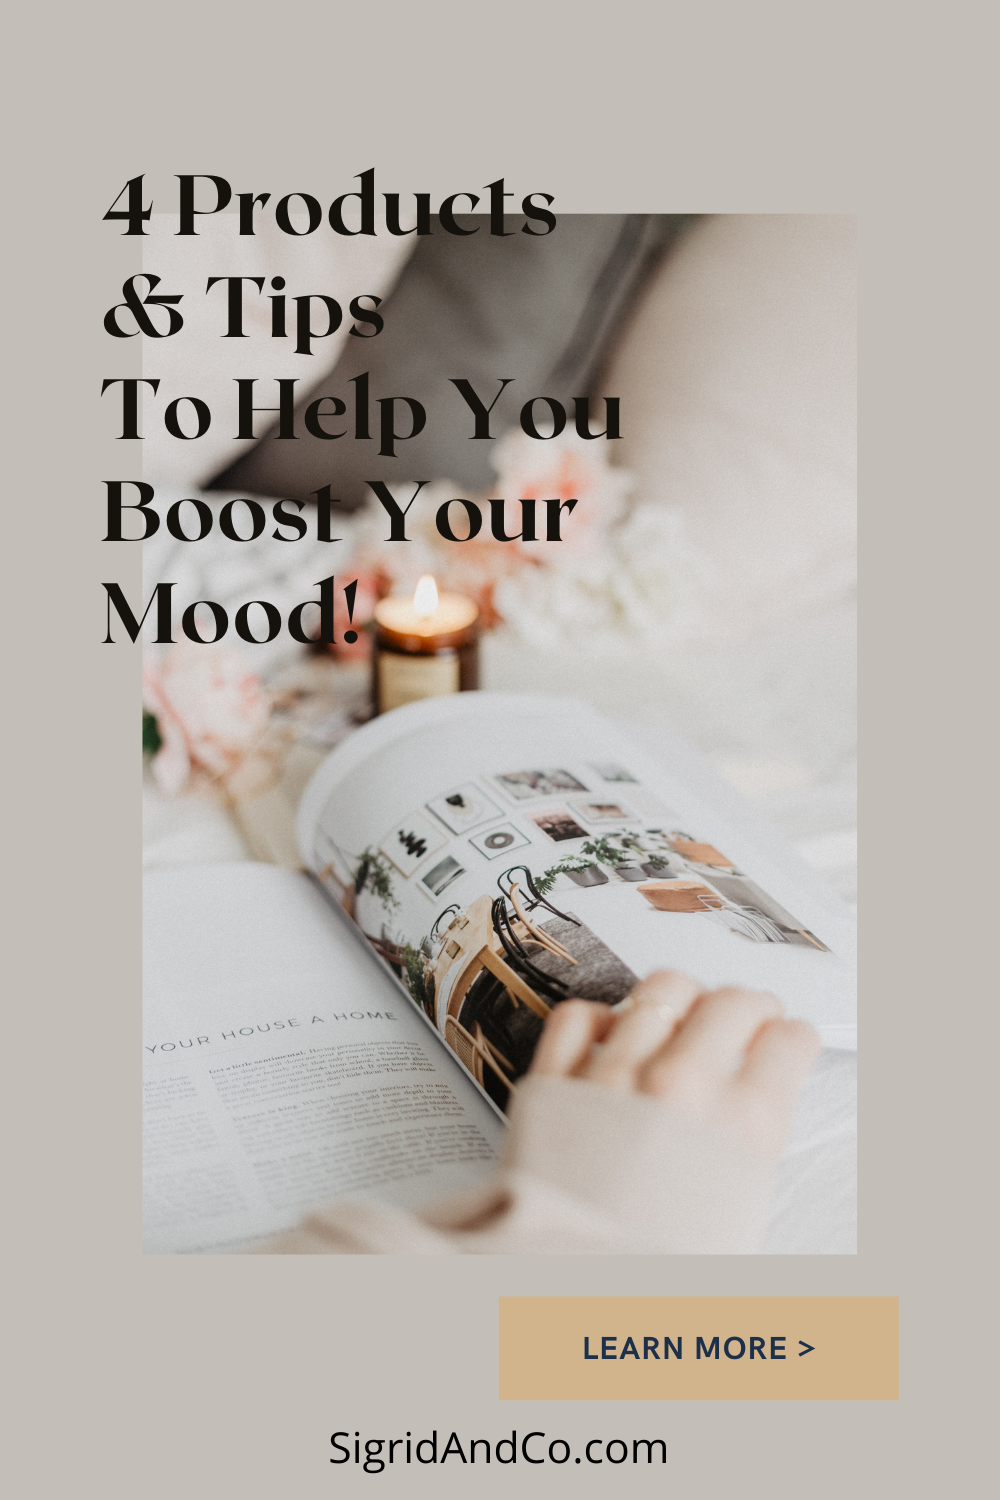 Wellness at Home: 4 Products and Tips to Boost Your Mood